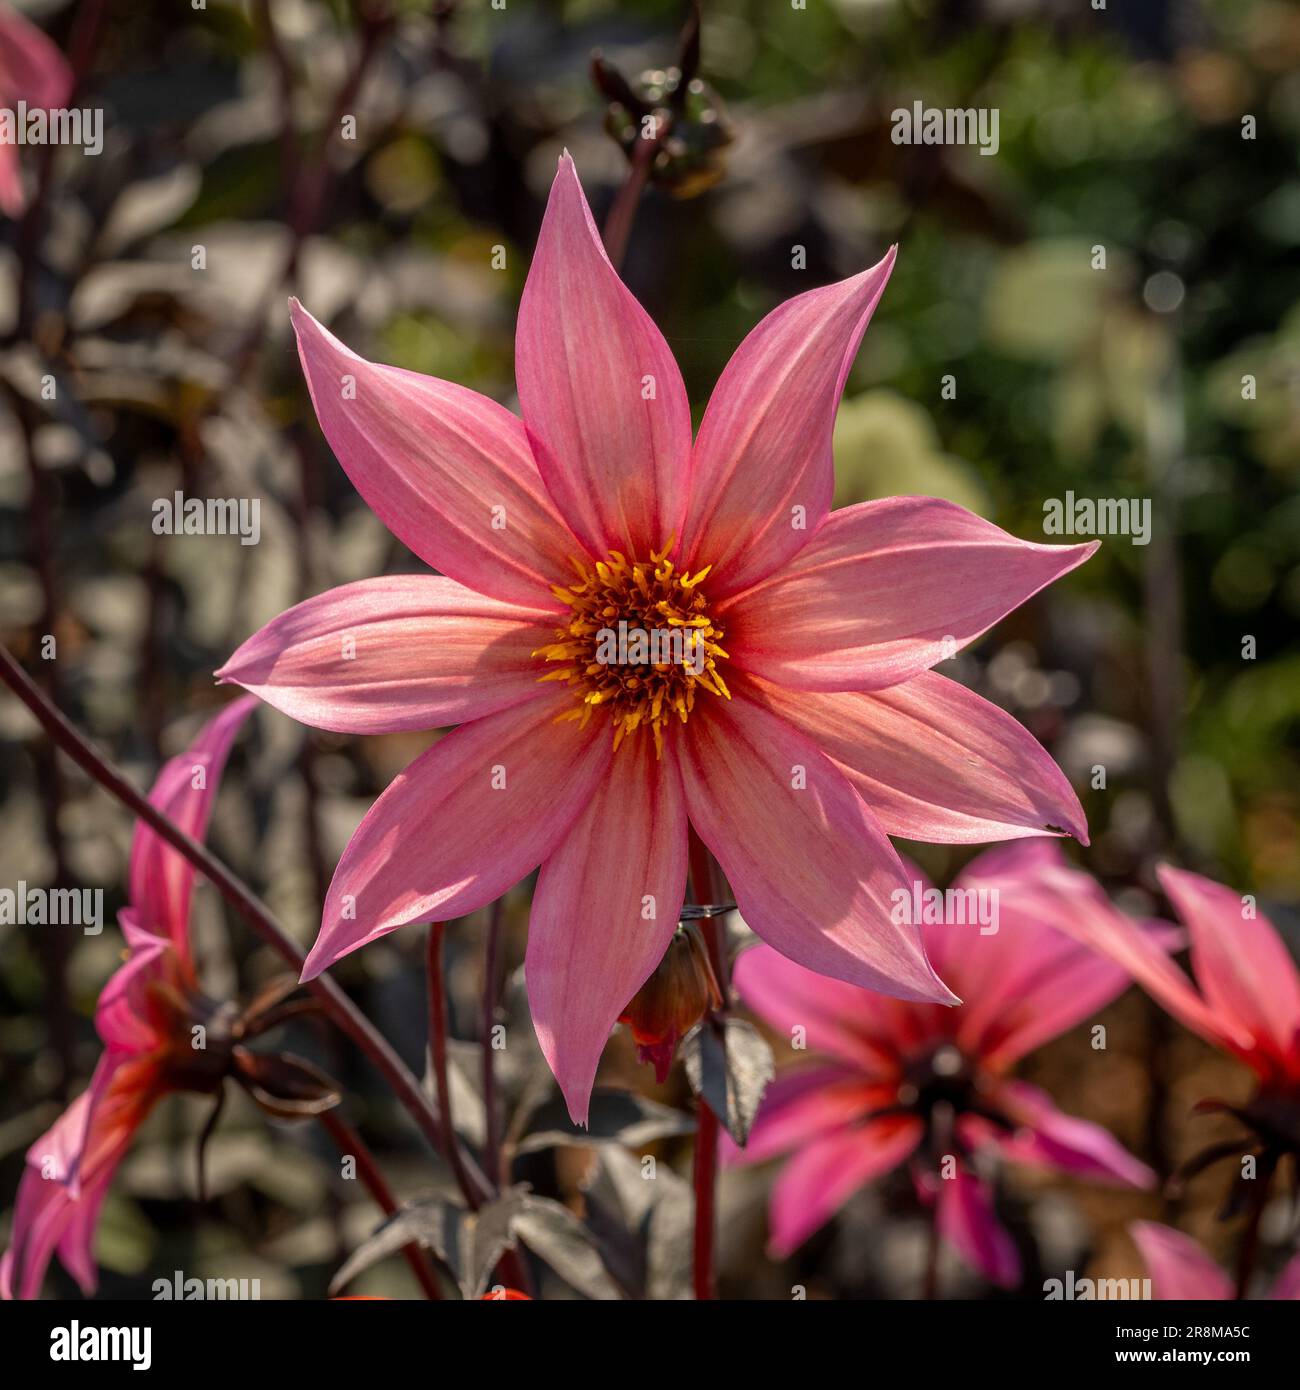 Coral pink flower of Dahlia 'Hawaiian Sunrise' with its bronze stem and foliage growing in a UK garden Stock Photo